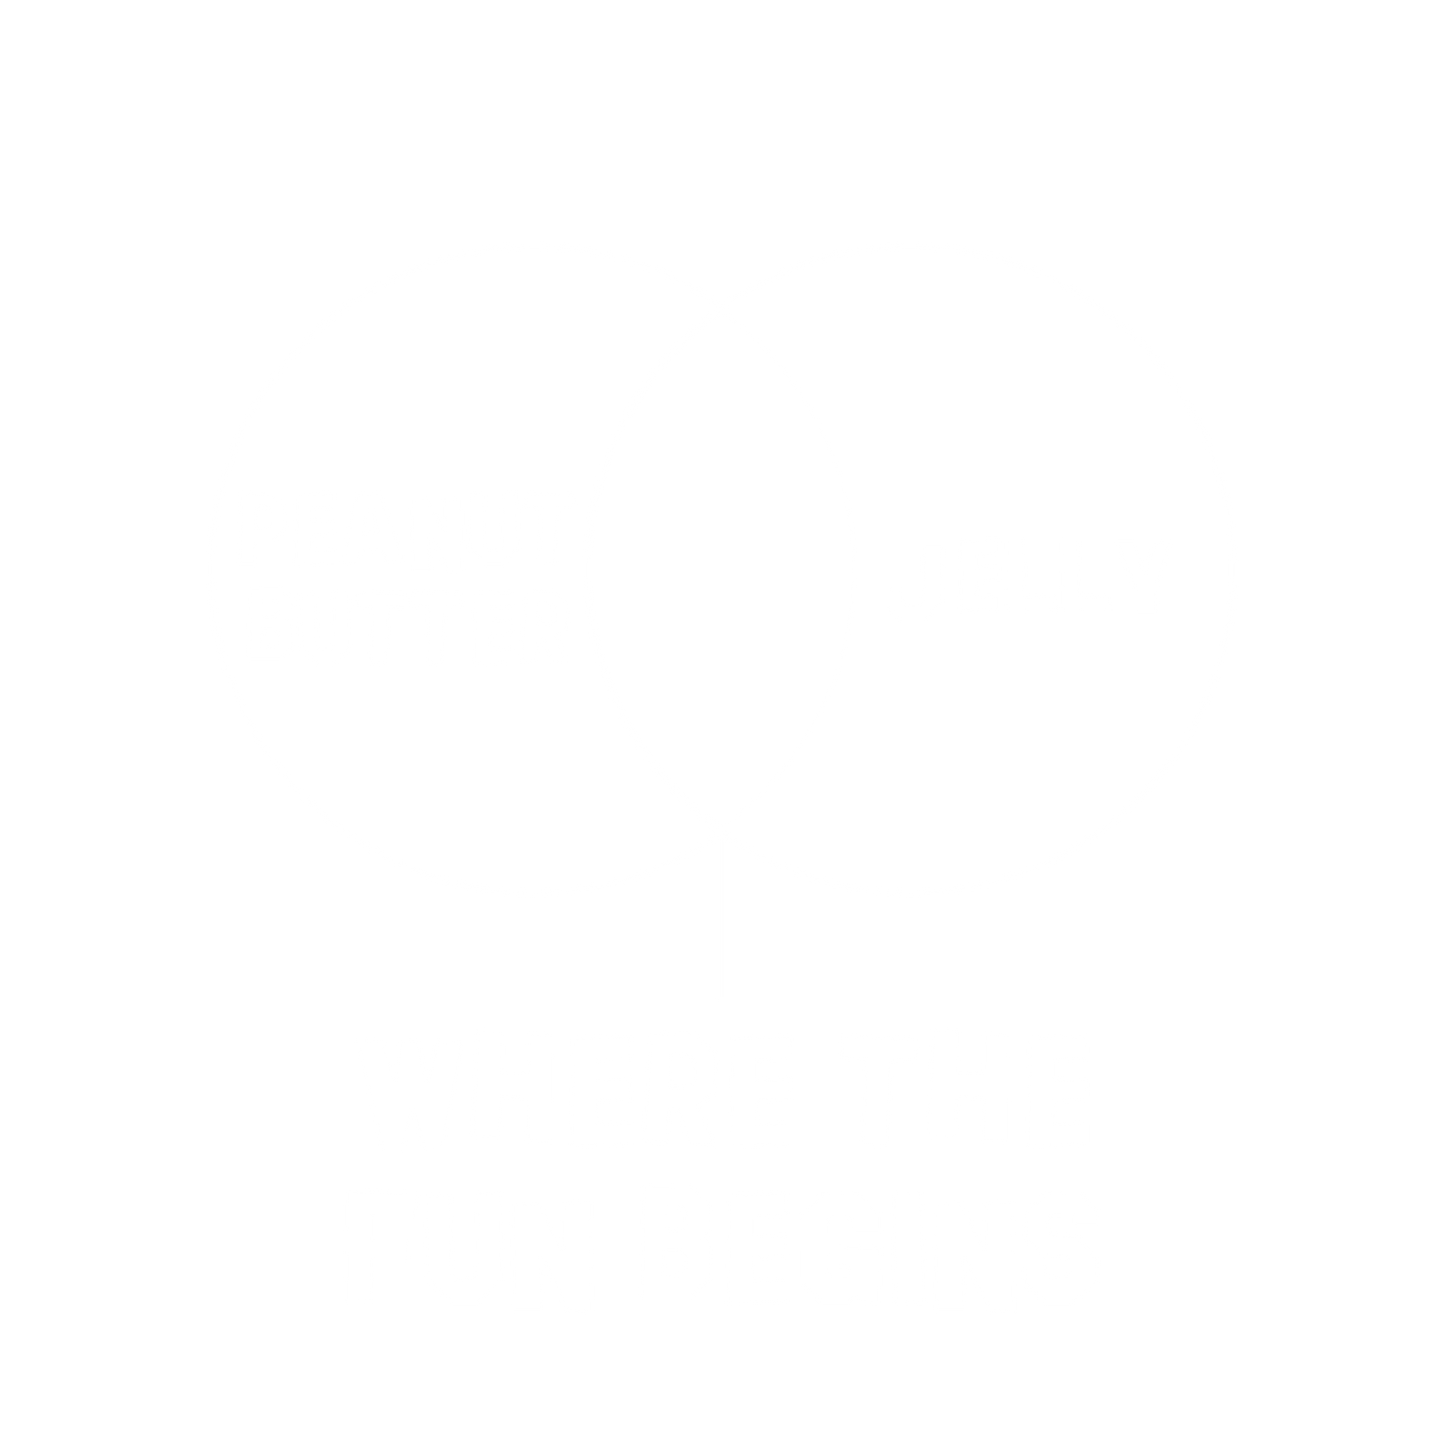 Peanut butter Jelly where the fun begins